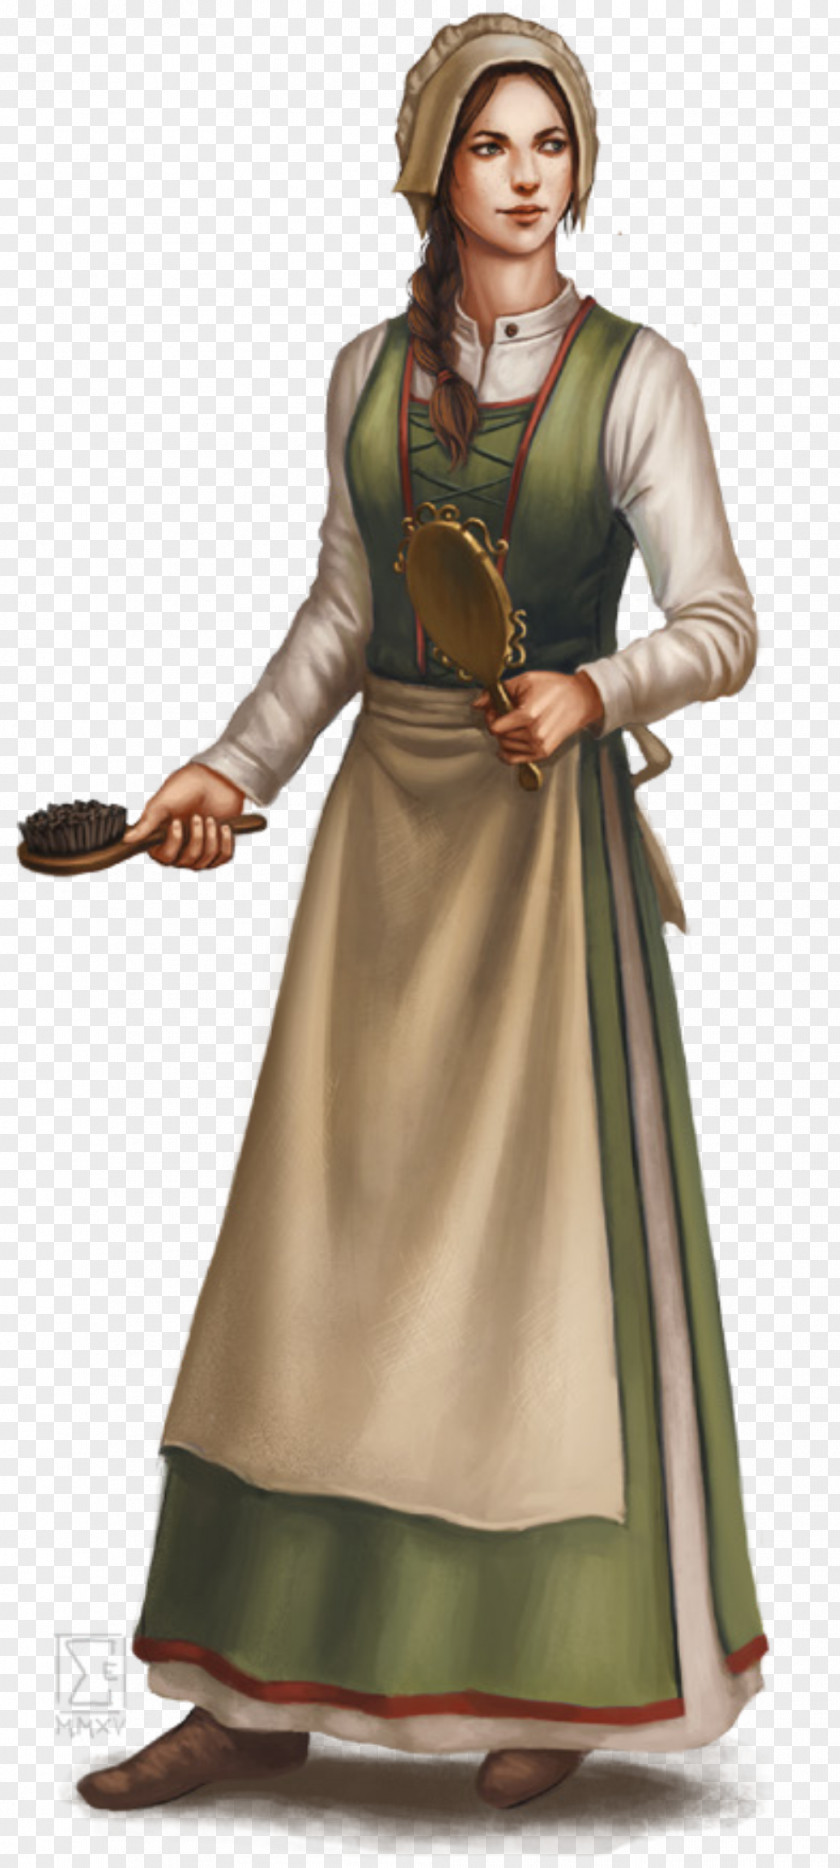 Pathfinder Rpg Wallpaper Roleplaying Game Dungeons & Dragons Character Woman Role-playing PNG